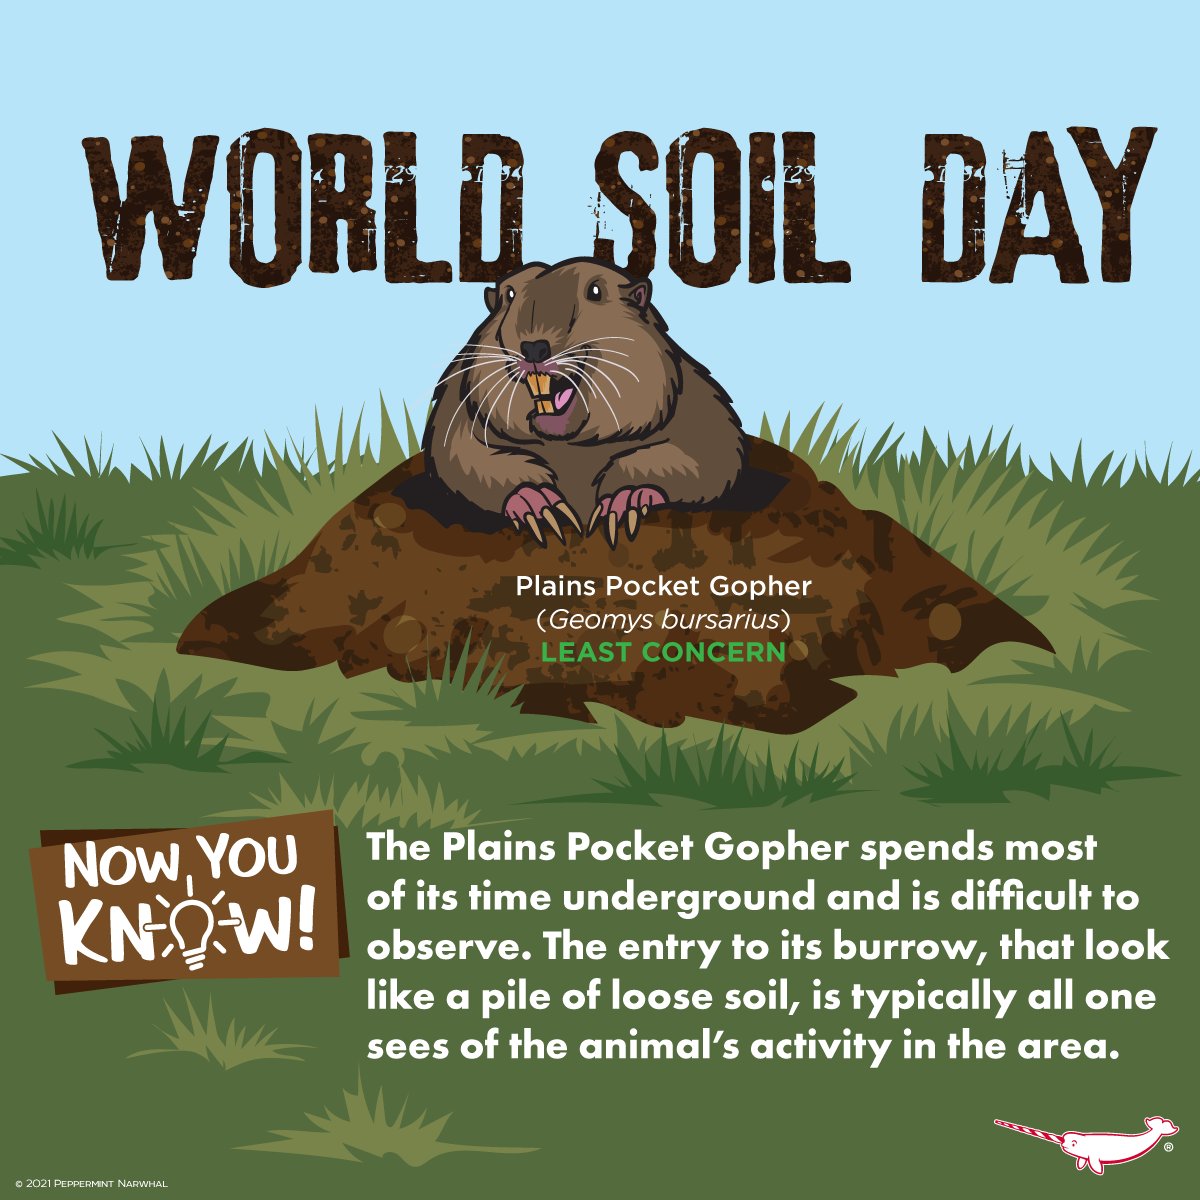 #WorldSoilDay 
#NowYouKnow #PlainsPocketGopher 

2023 Animal Holiday Calendar
& More Great Gift Ideas
Shop #PeppermintNarwhal at peppermintnarwhal.com

#SoilDay #Soil #PocketGopher #Gopher